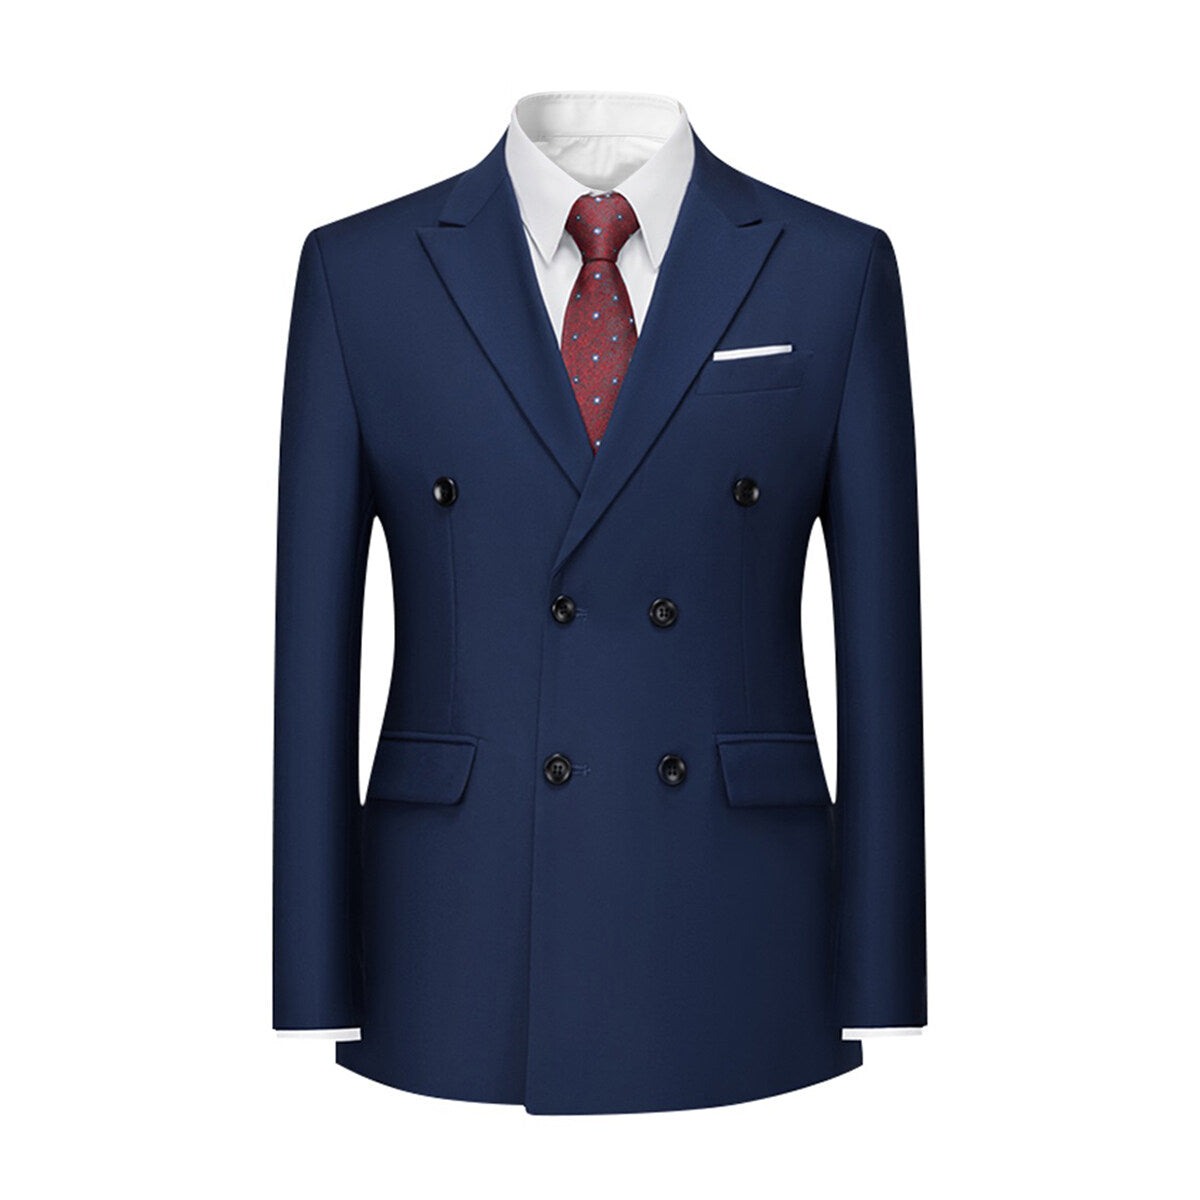 Men's Solid Color Double Breasted Business Suit Navy